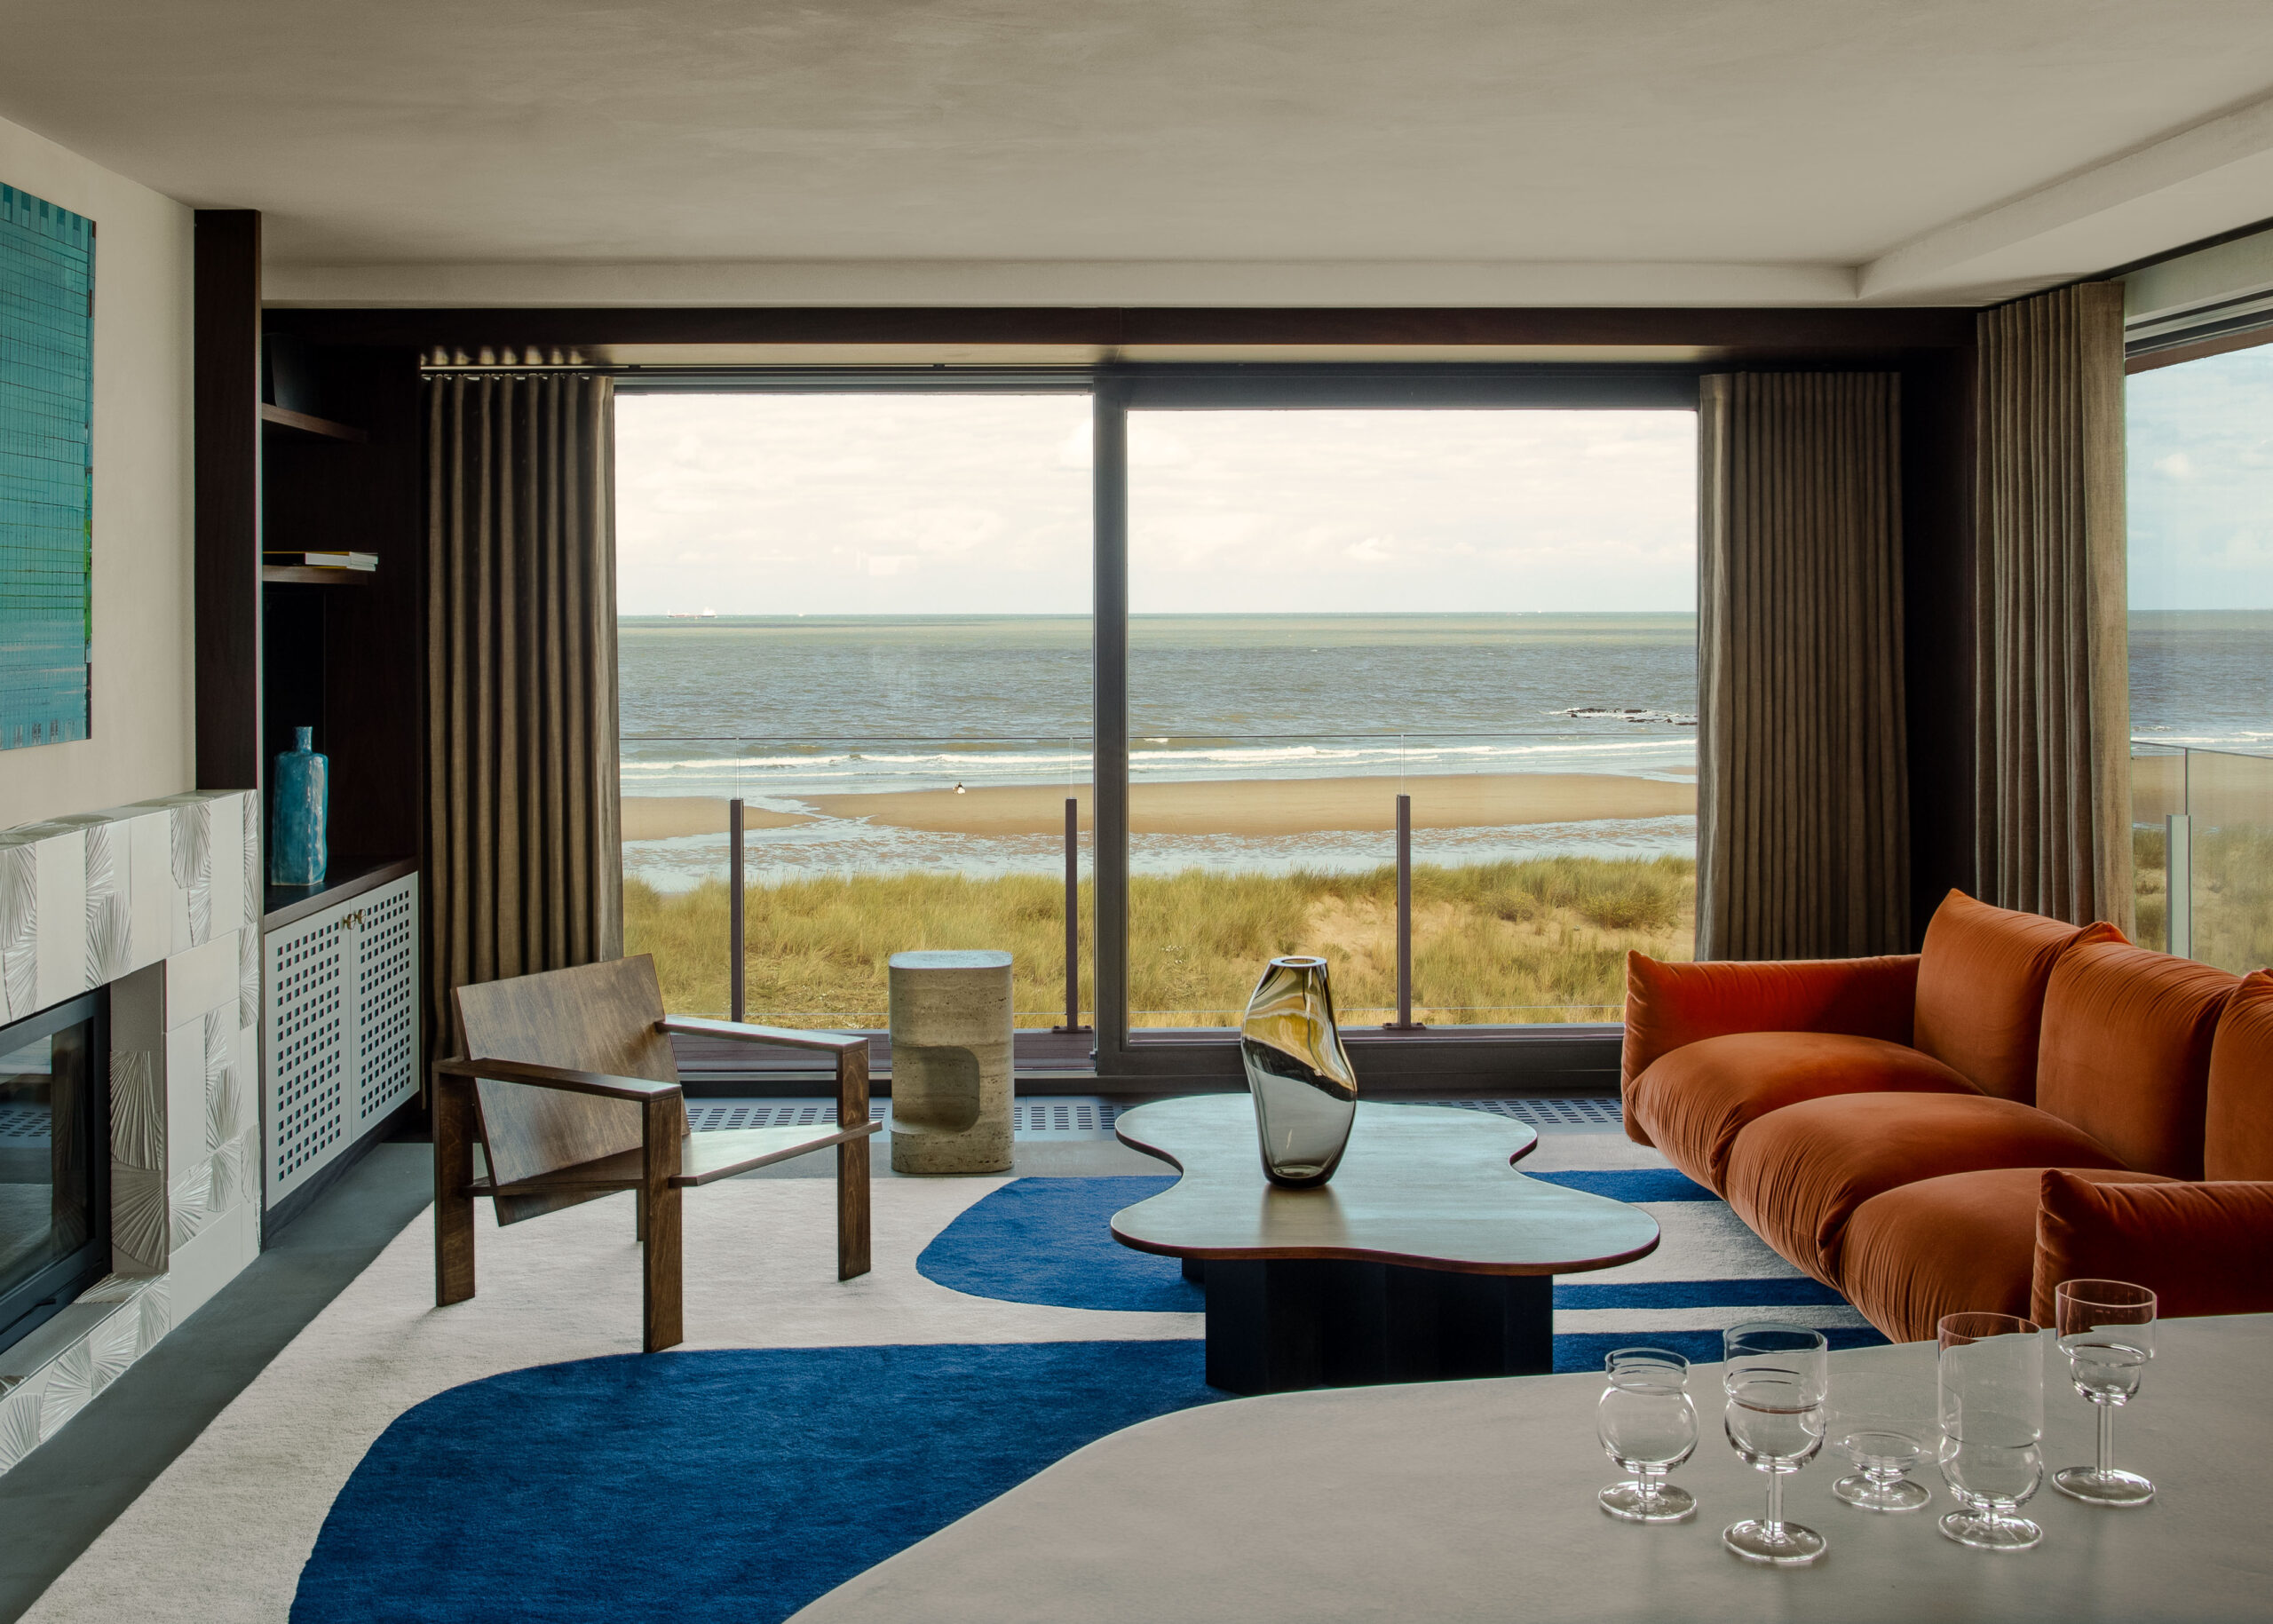 Image Crafting Perfection: A Bespoke Carpet for the ‘Sunset Apartment’ by Aurélie Penneman Interior Design in Knokke-Zoute